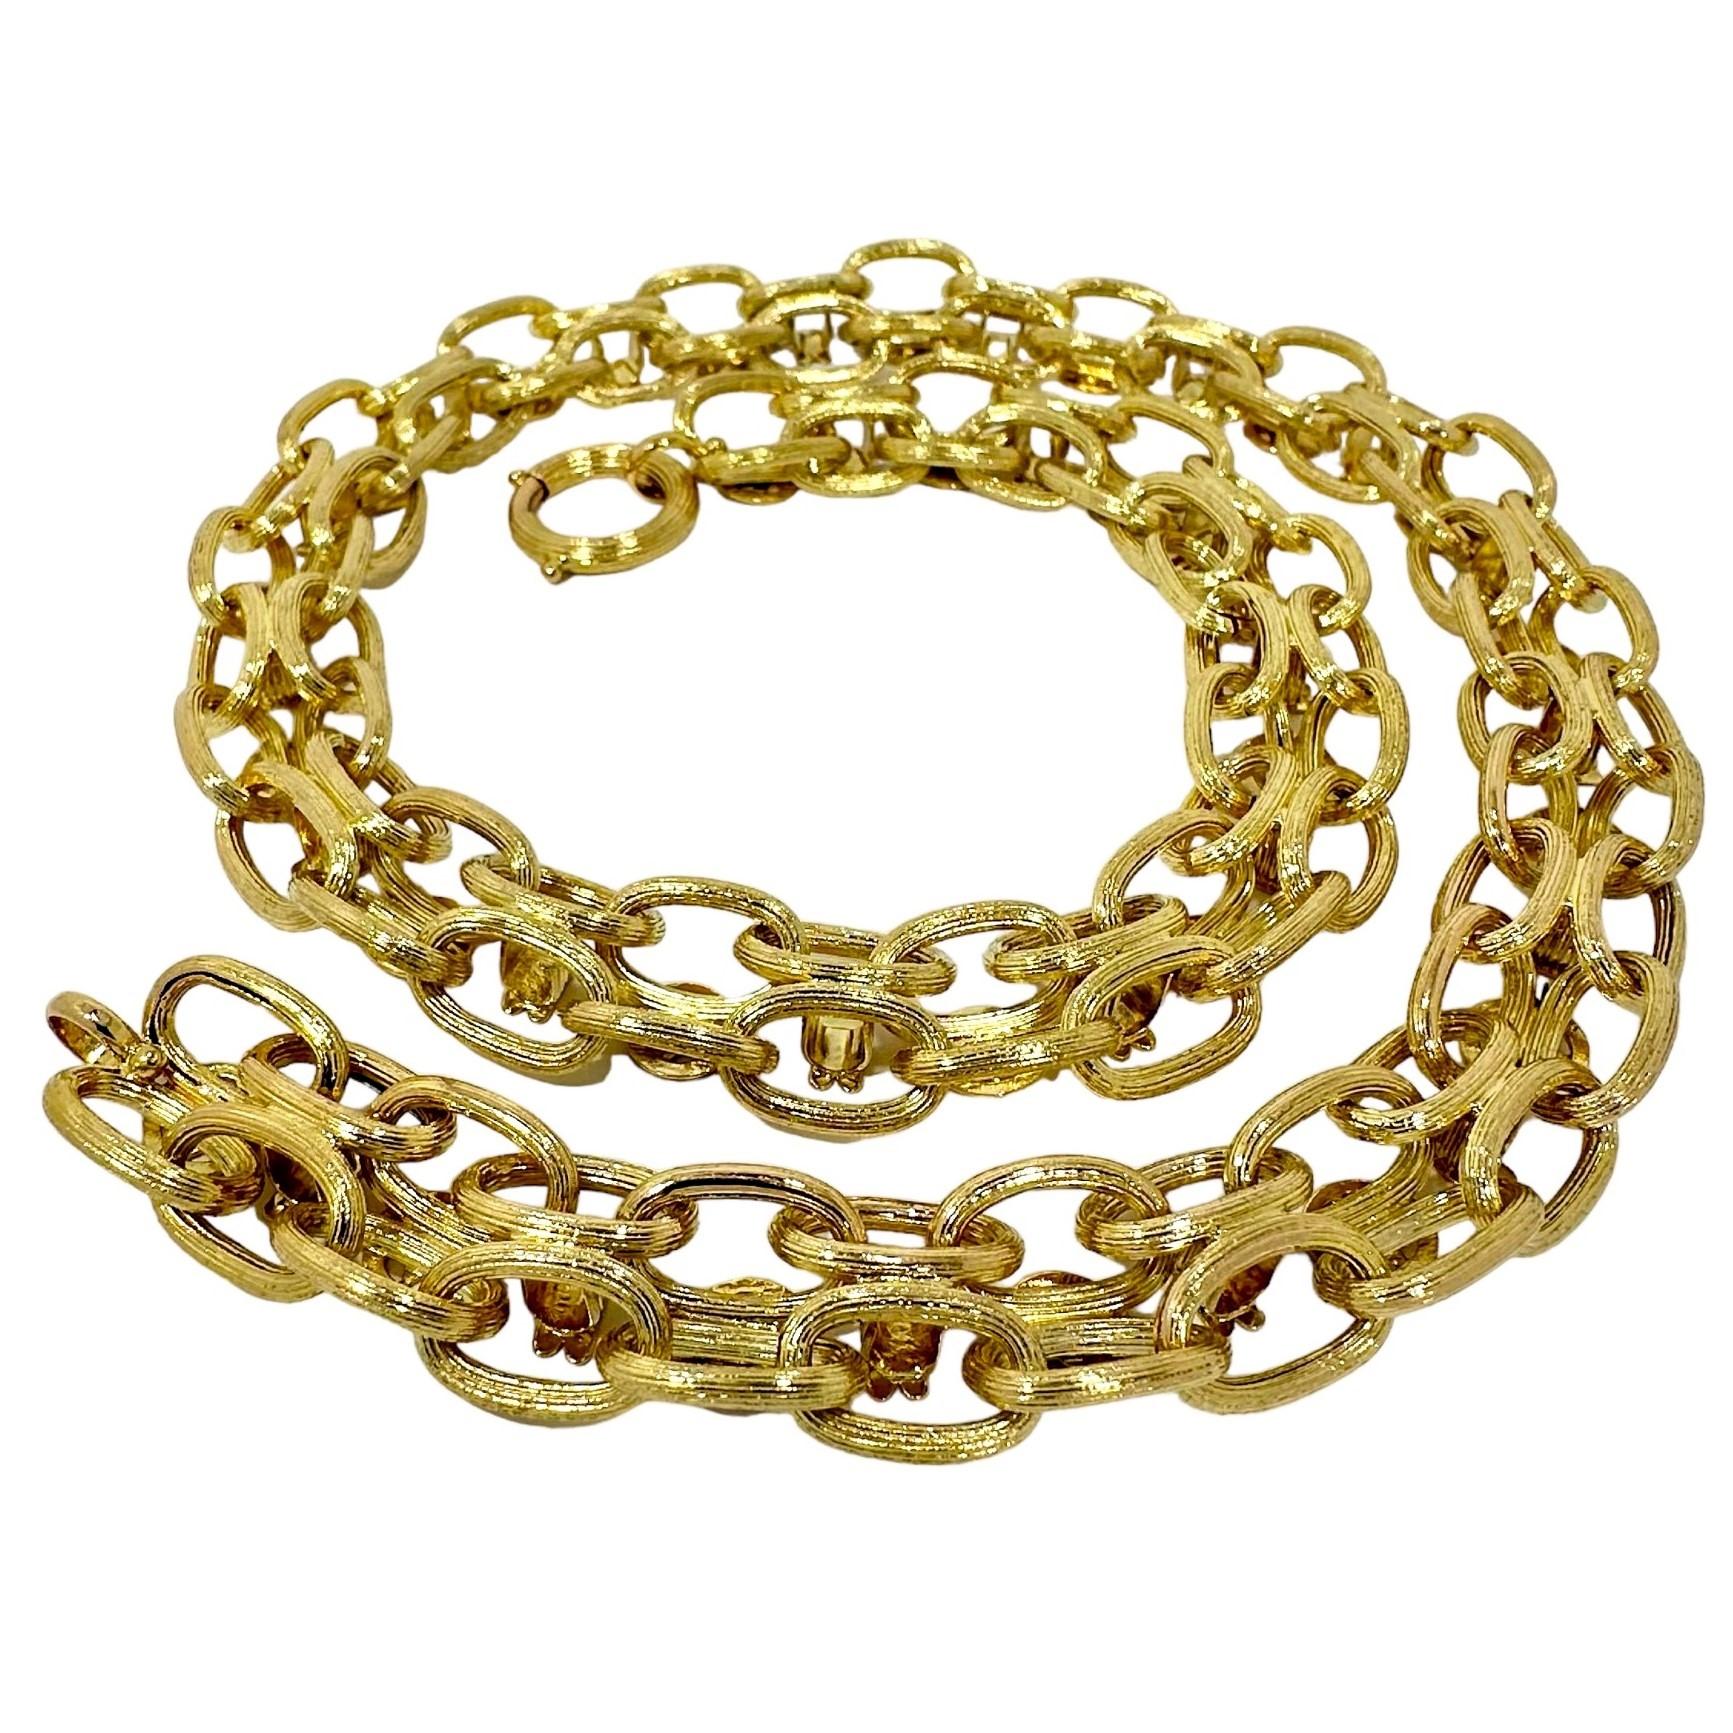 This original Victorian Period 14k yellow gold neck chain is fully reversible and, by virtue of it's removable clasp can be adjusted to wear at any length up to it's full 22 inches. It measures 5/8 inches wide and 1/4 inch in height, making this an